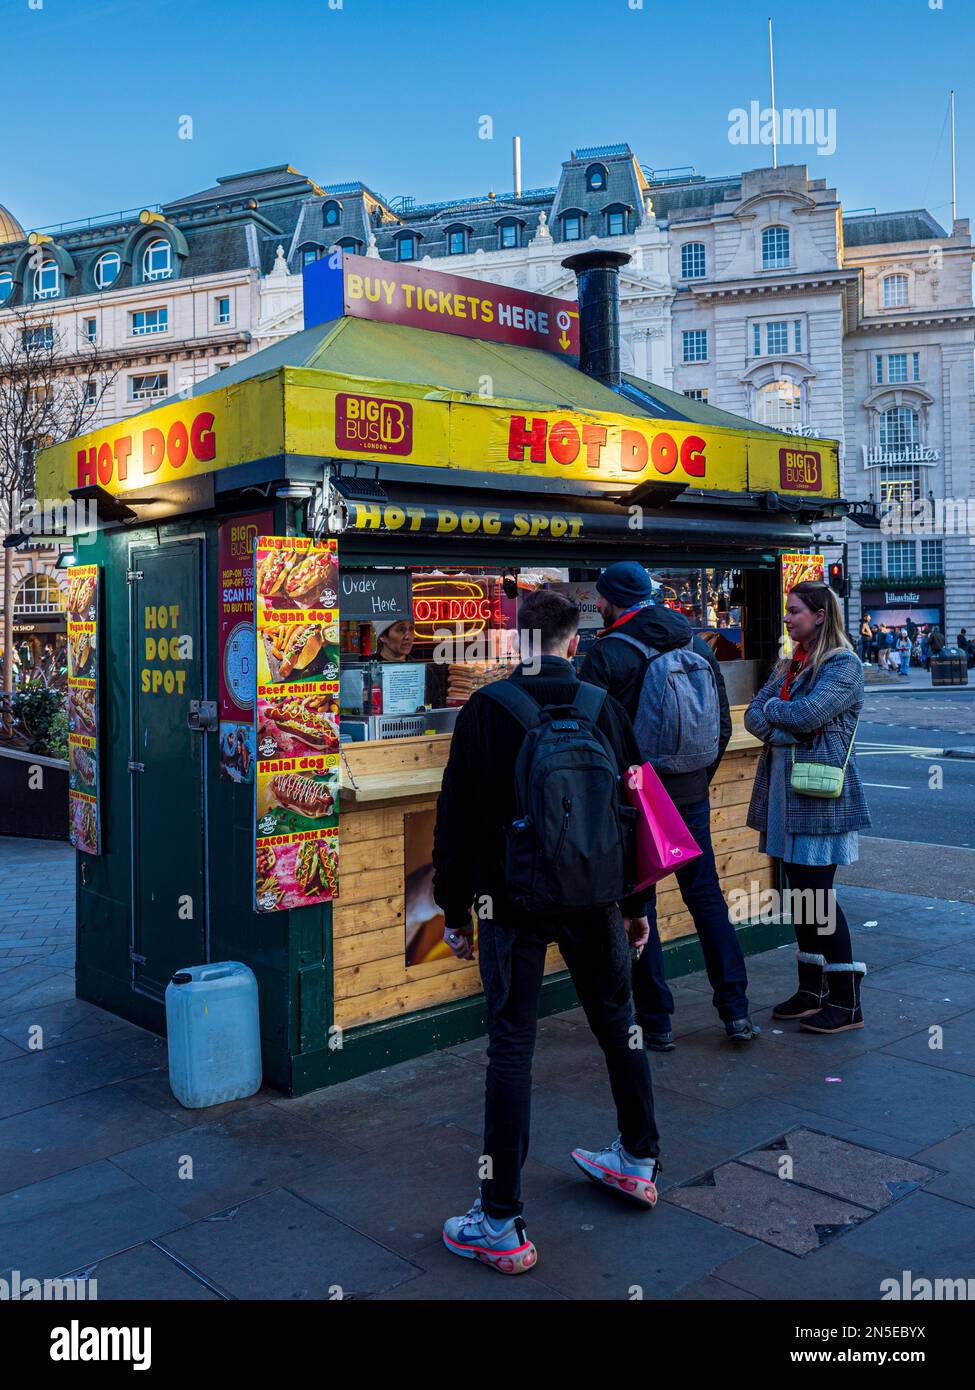 Hot Dog Stall London - Hot Dog Stall on Piccadilly Circus in Central London. London Fast Food. Stock Photo